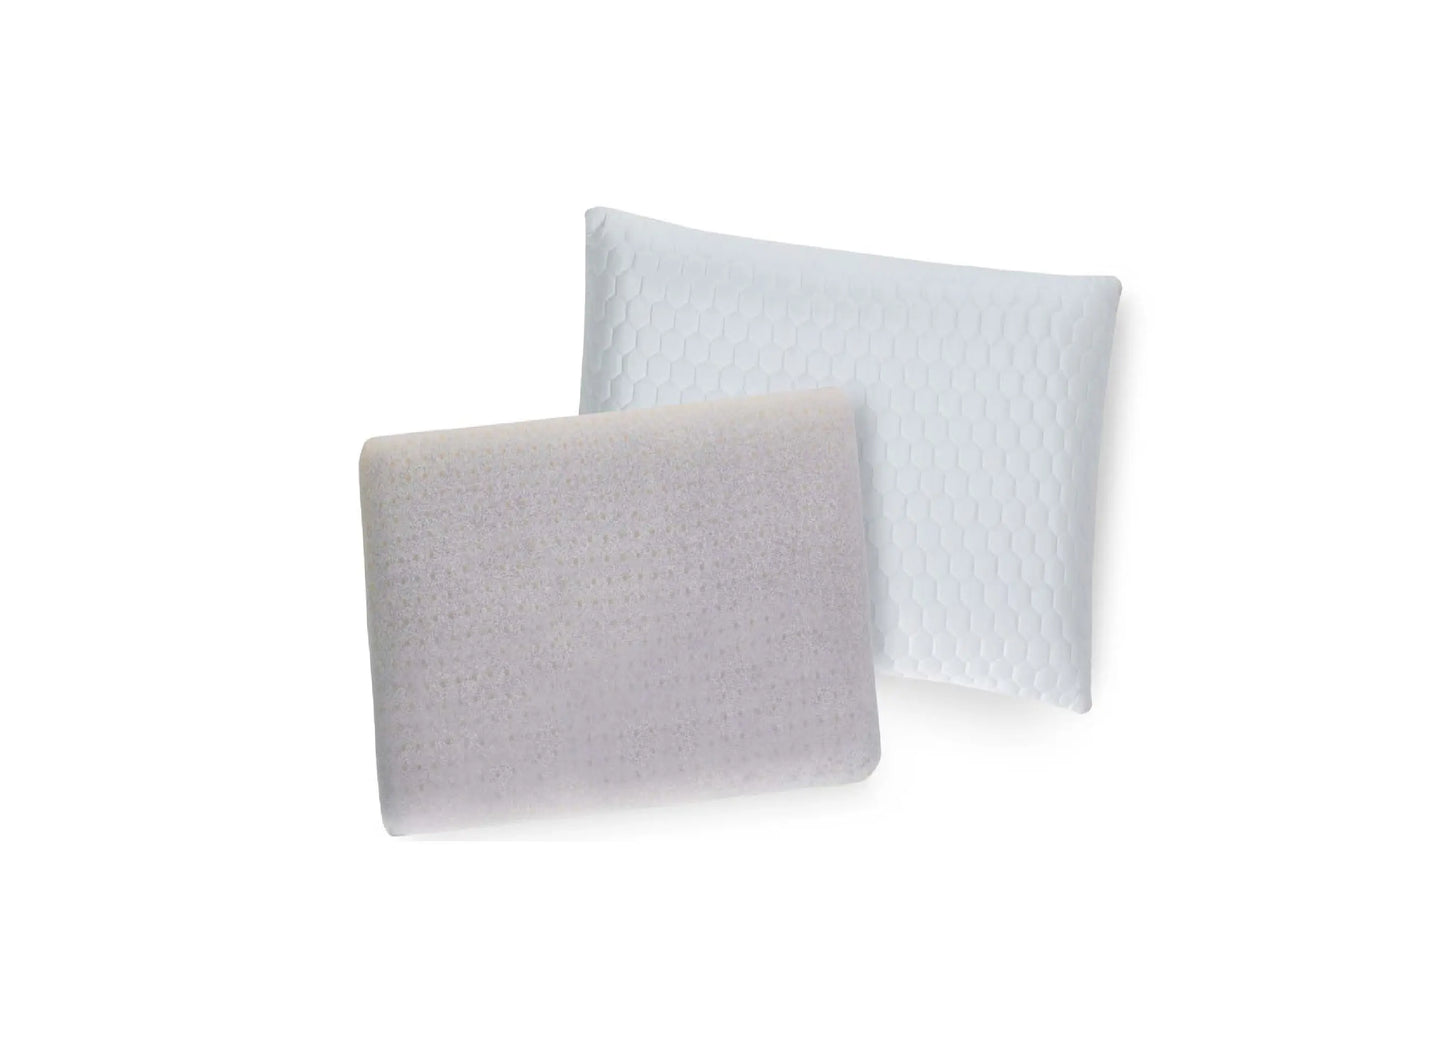 Low Profile Cooling Memory Foam Pillow house brand private label